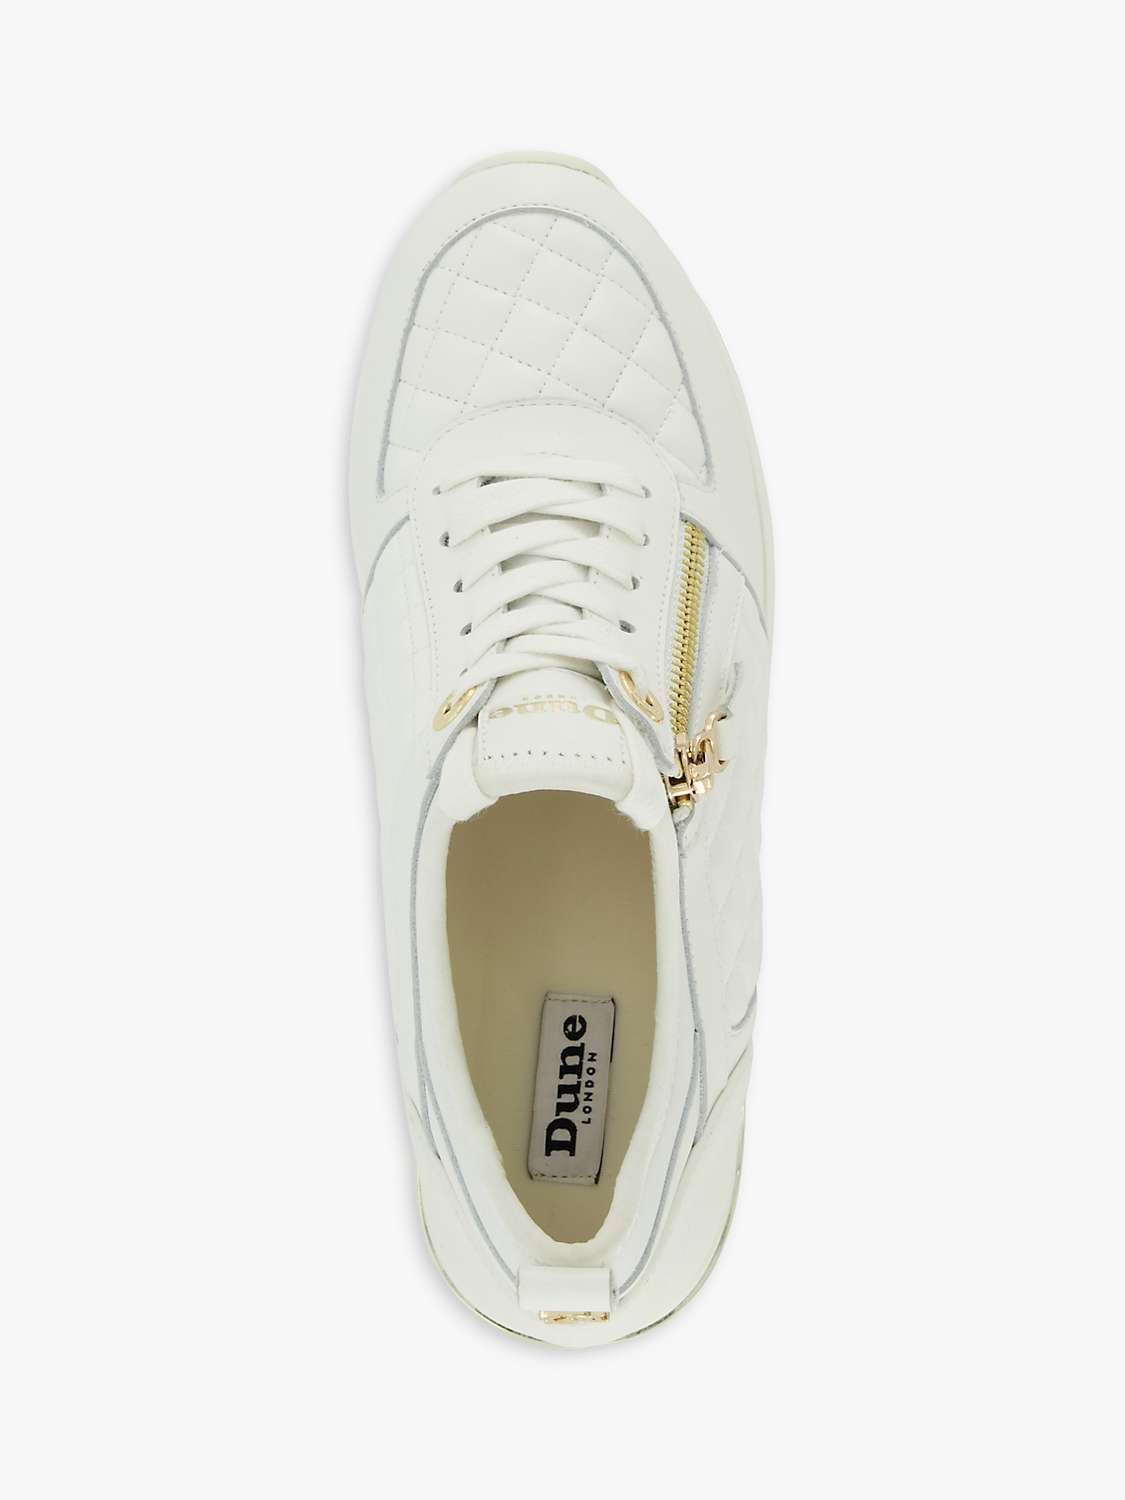 Dune Eilin Leather Wedge Heel Trainers, White at John Lewis & Partners